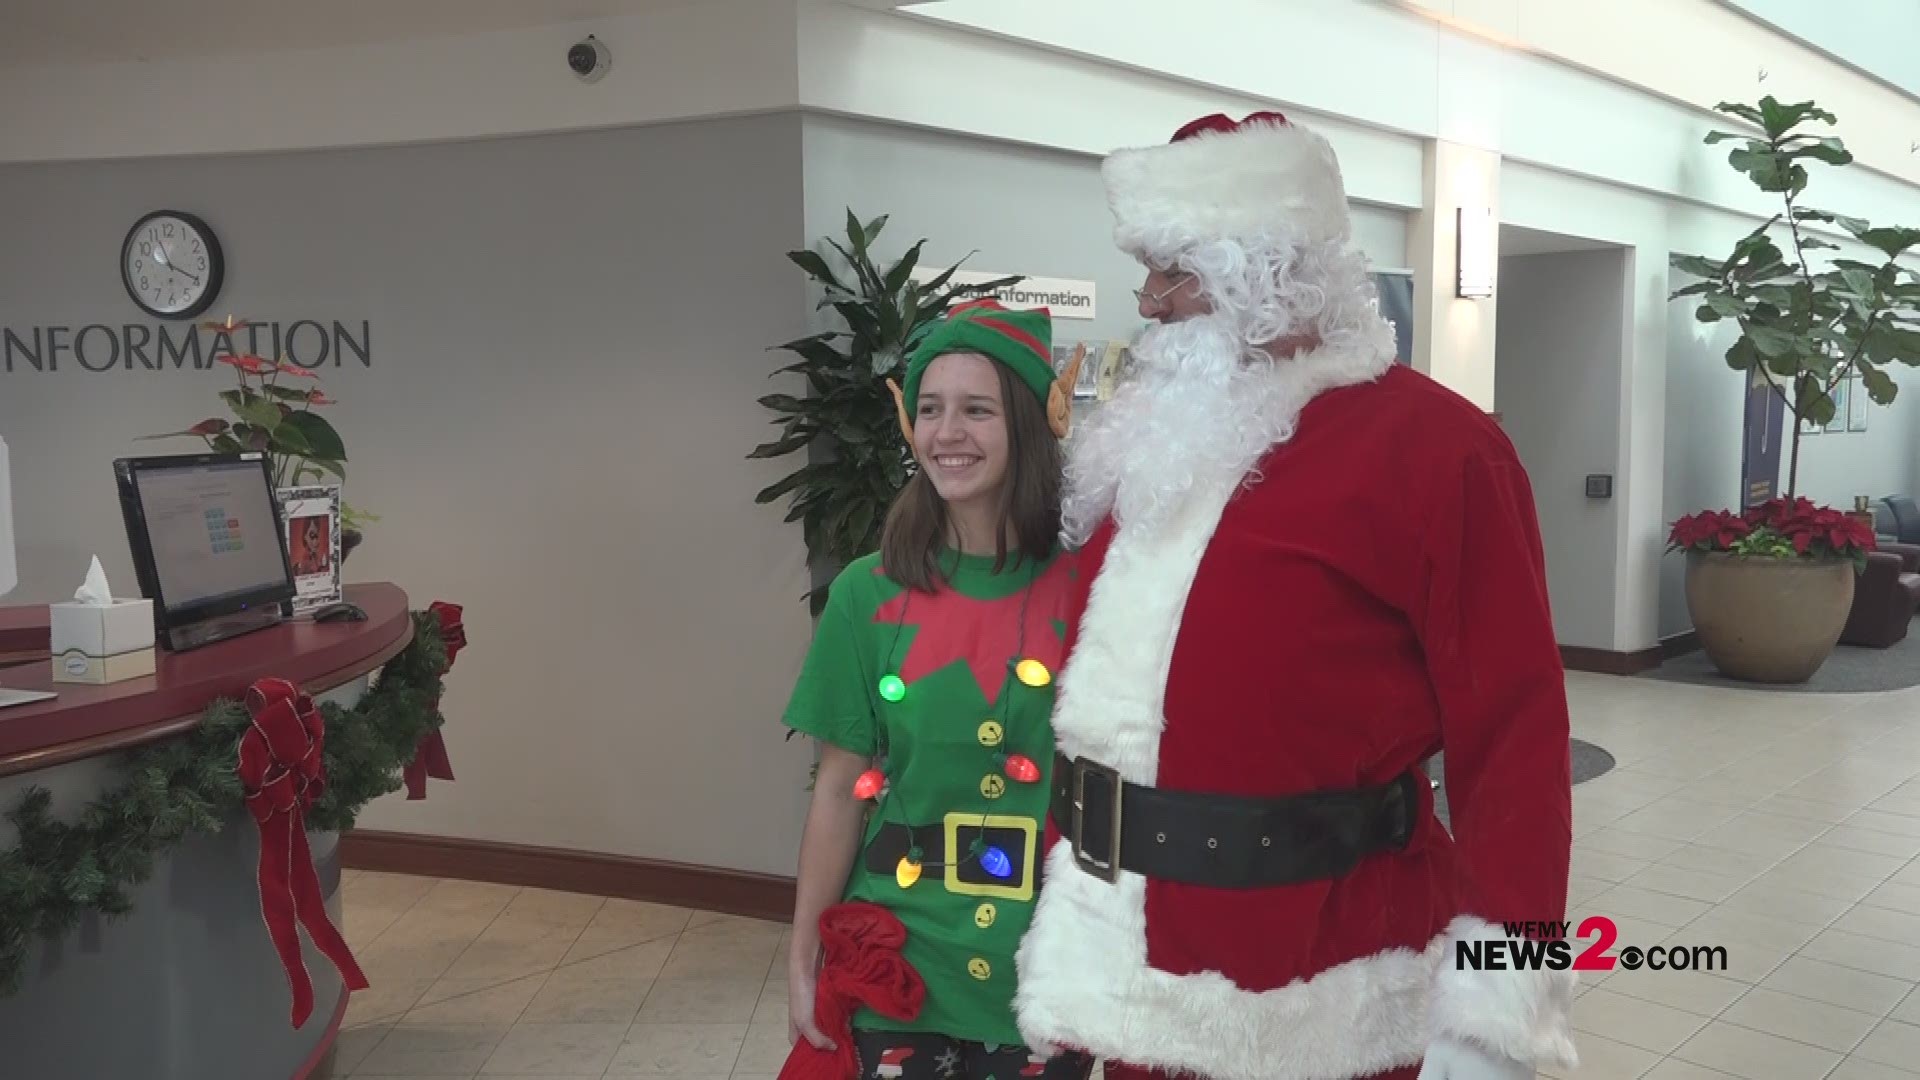 It's never too early to spread some Christmas cheer and Santa helped the Community Blood Center of the Carolinas deliver puppies to patients at Alamance Regional Medical Center.